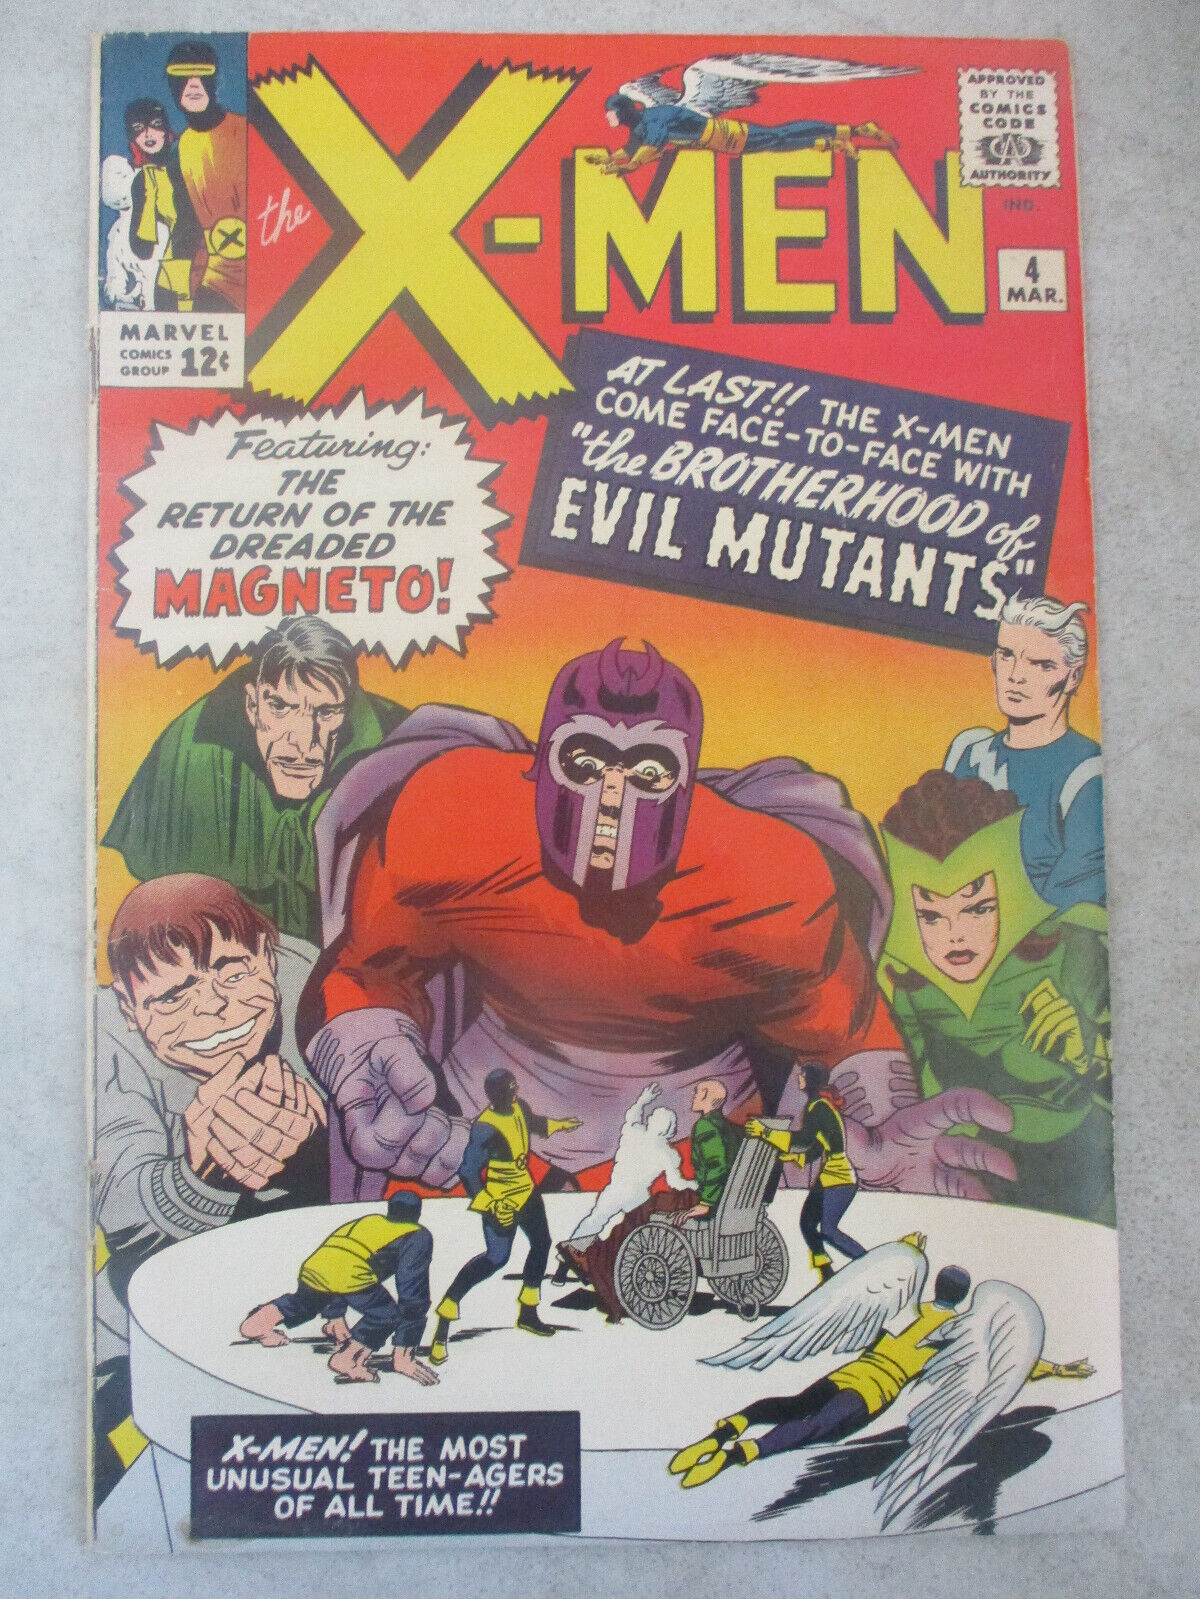 VINTAGE MARVEL COMICS XMEN 4 1ST APPEARANCE OF SCARLET WITCH AND QUICKSILVER